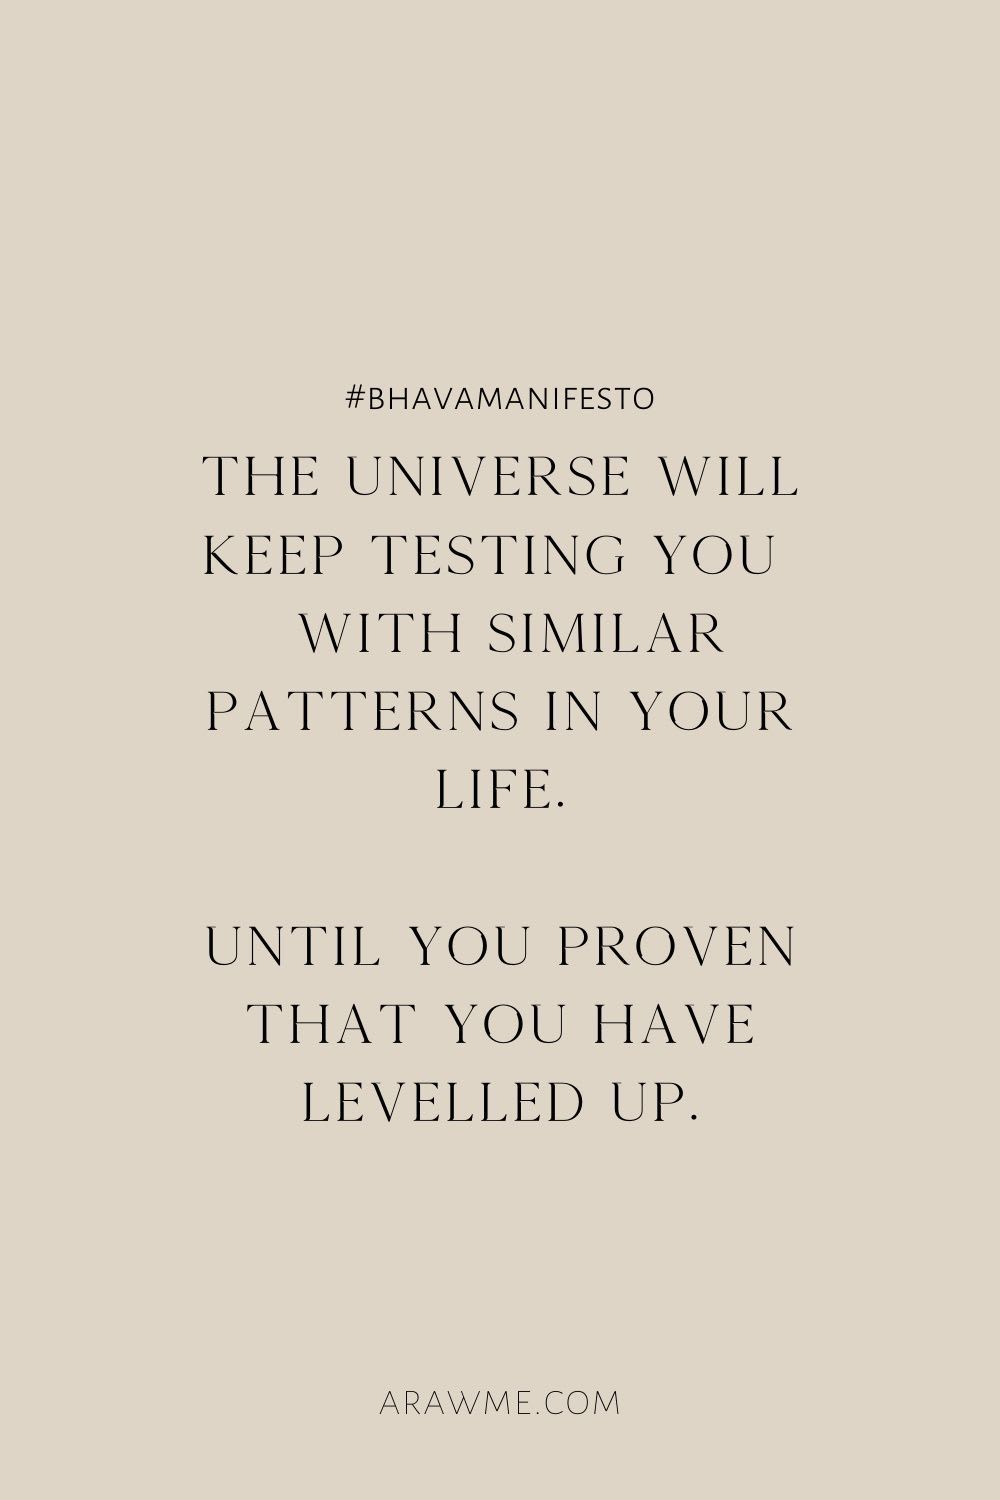 Until you have proven that you have levelled up.